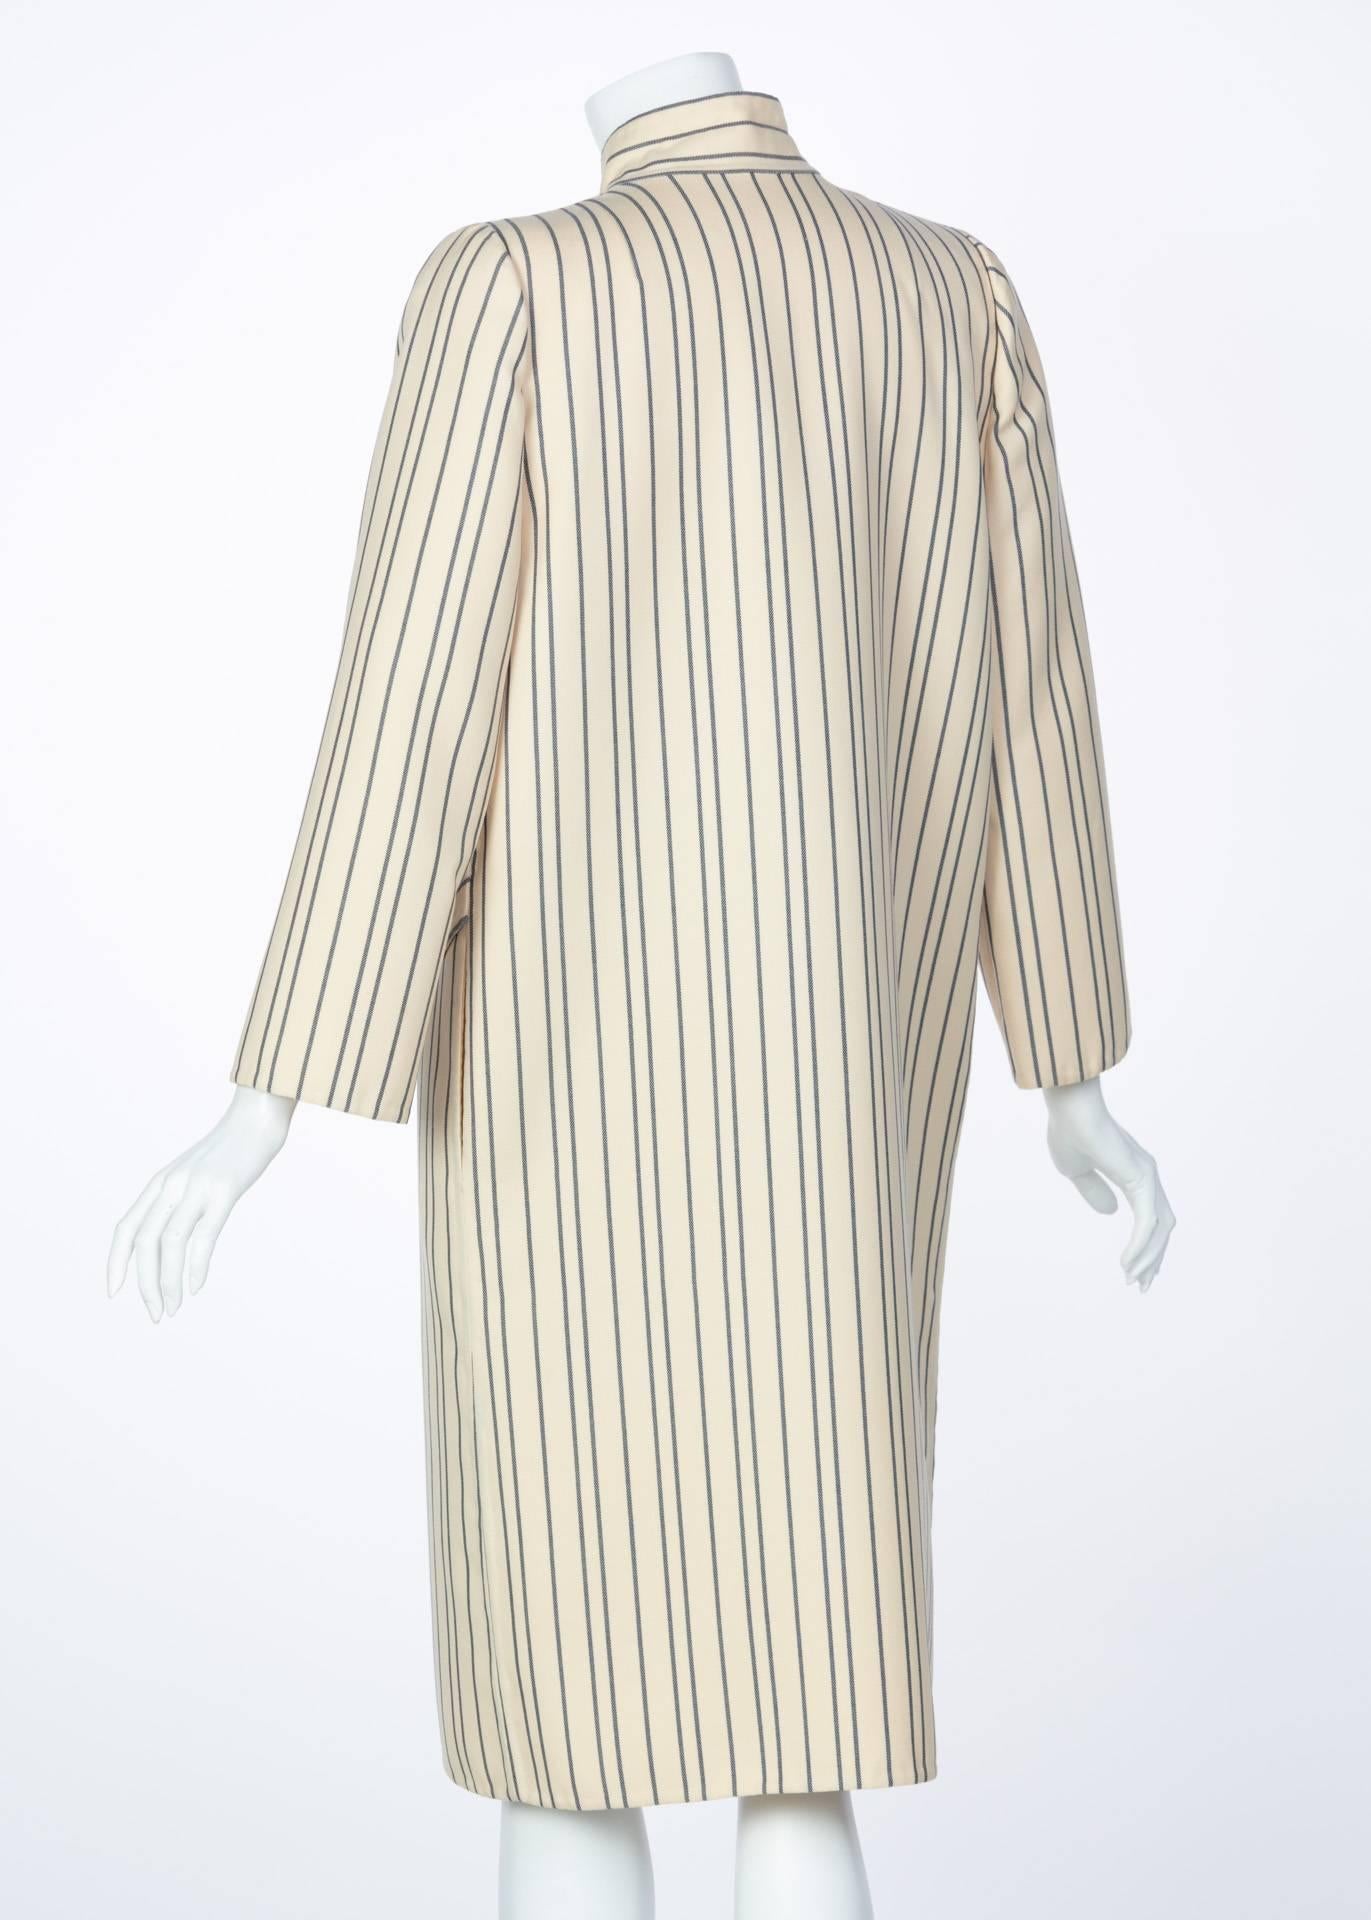 Women's 1990s Pauline Trigere creme and Navy Striped Wool Twill Coat Skirt Suit For Sale